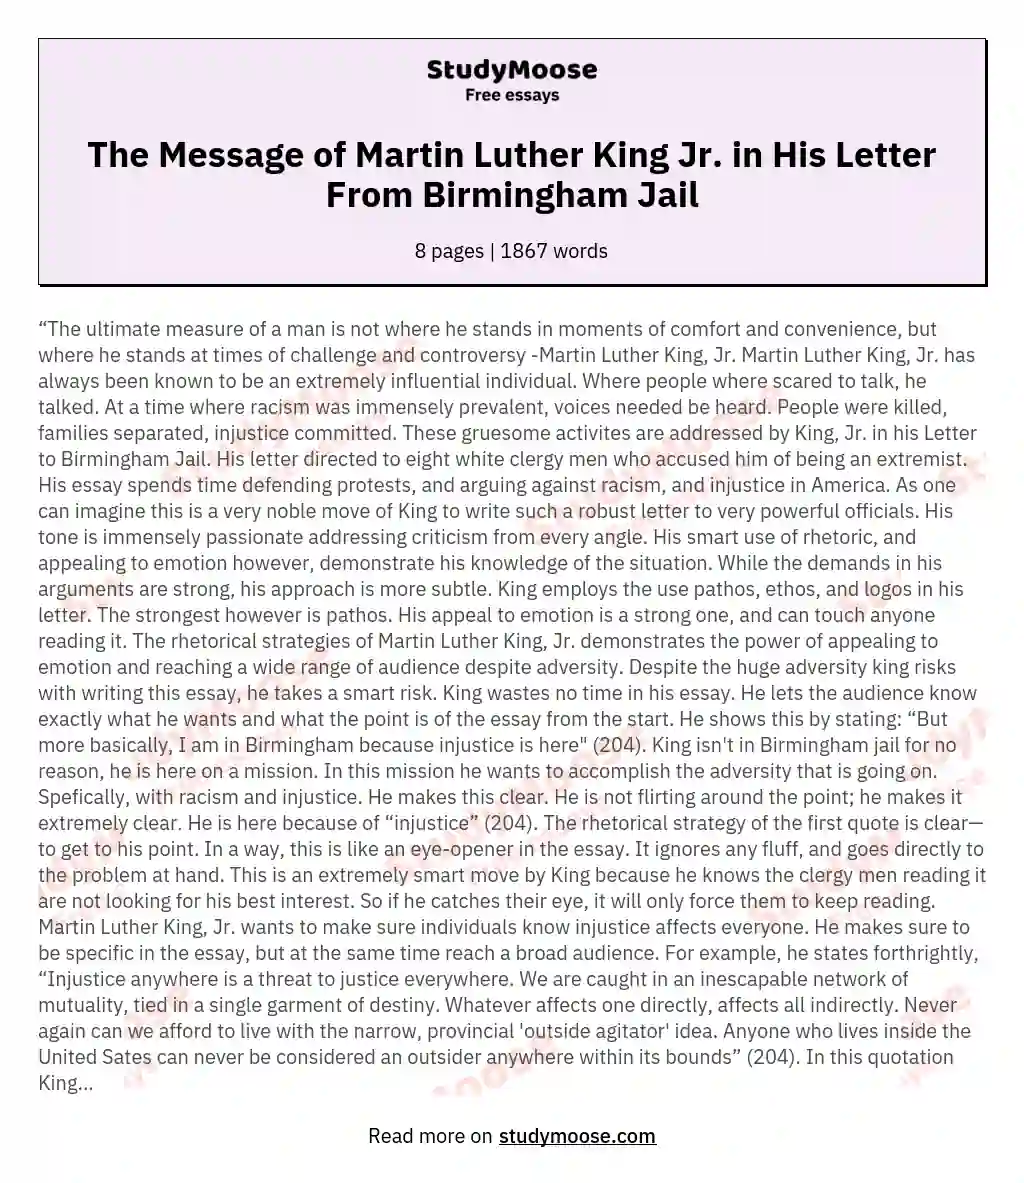 The Message of Martin Luther King Jr. in His Letter From Birmingham Jail essay